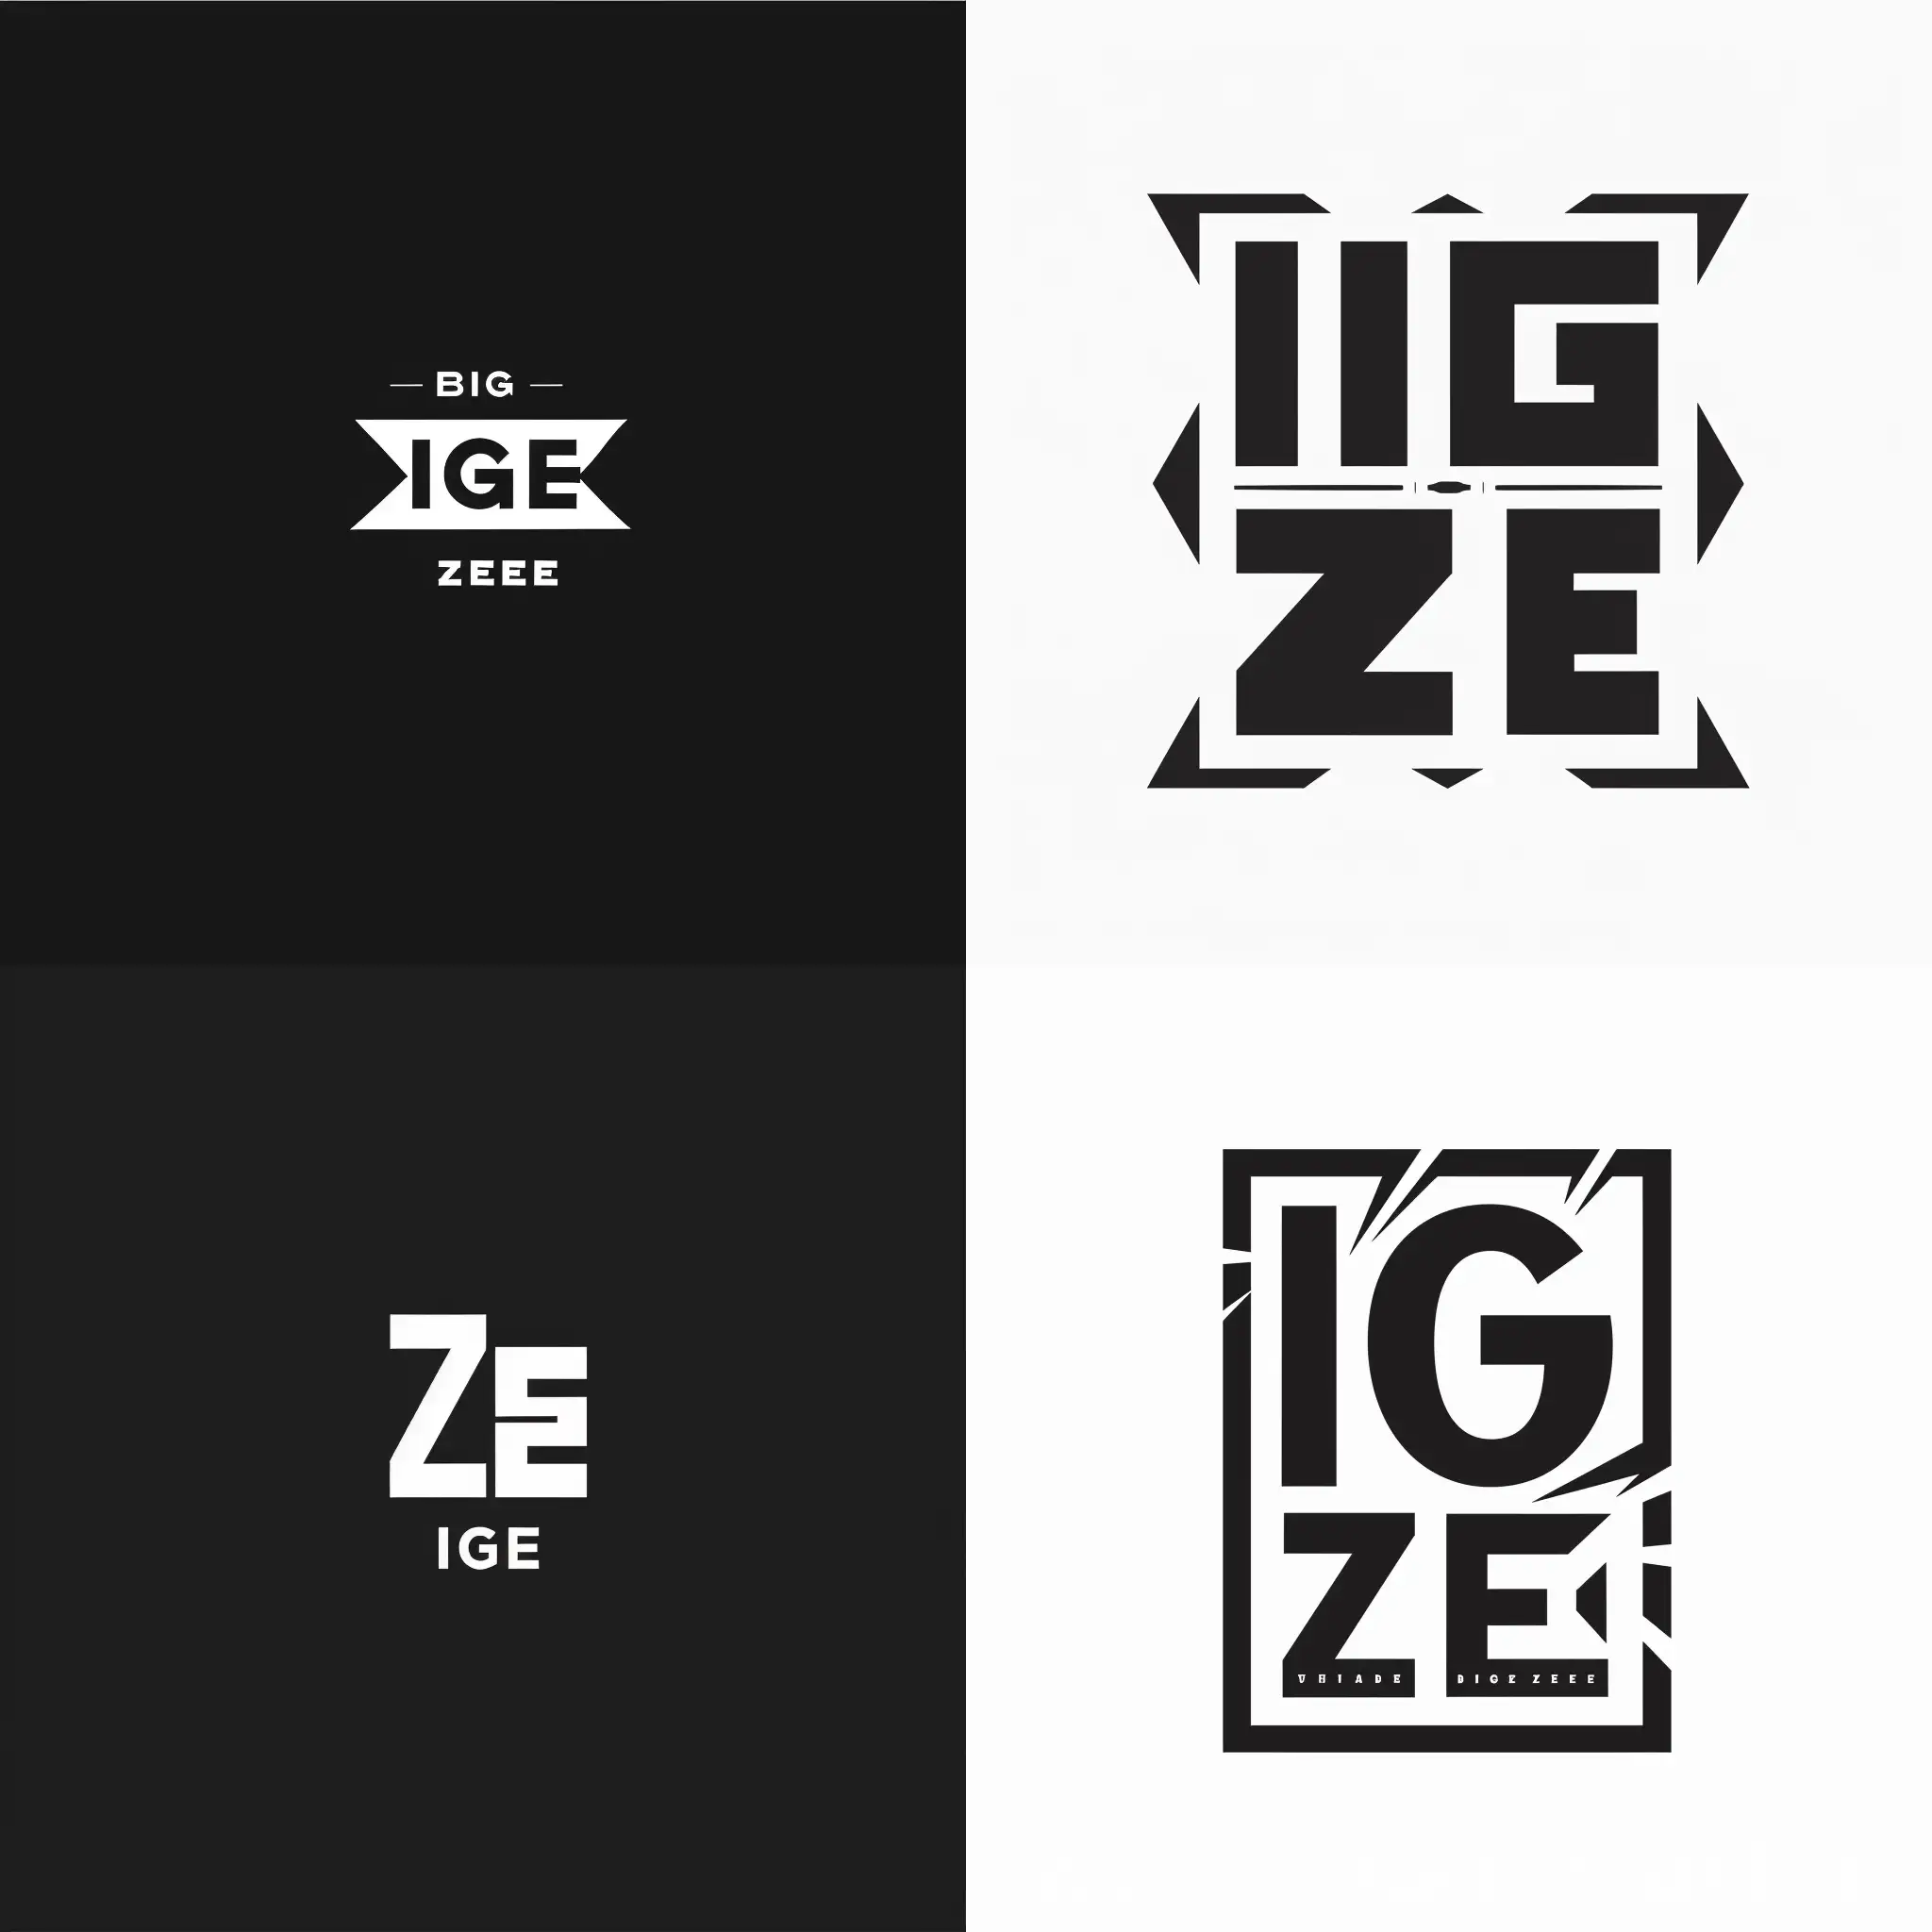 BIG ZEE, logo, black and white, simple, professional 